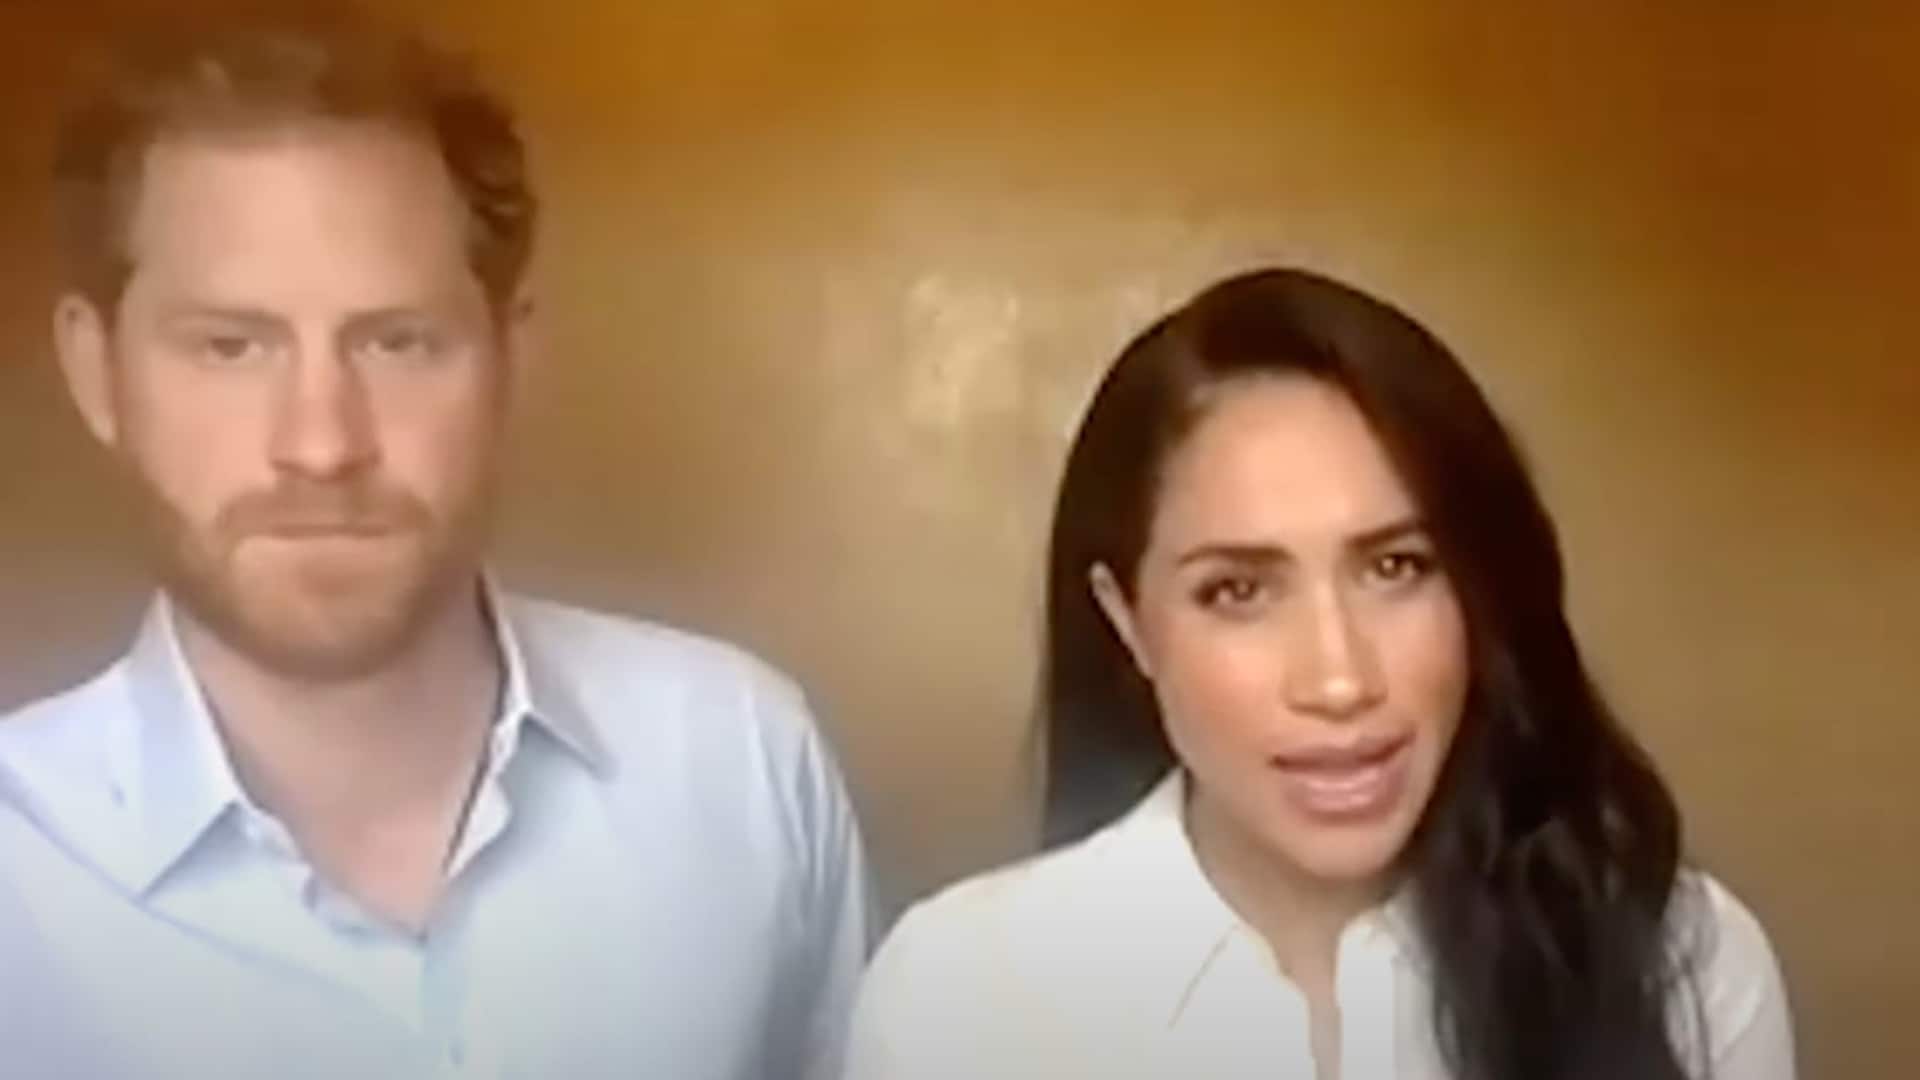 Meghan Markle and Prince Harry participate in conversation on fairness and justice